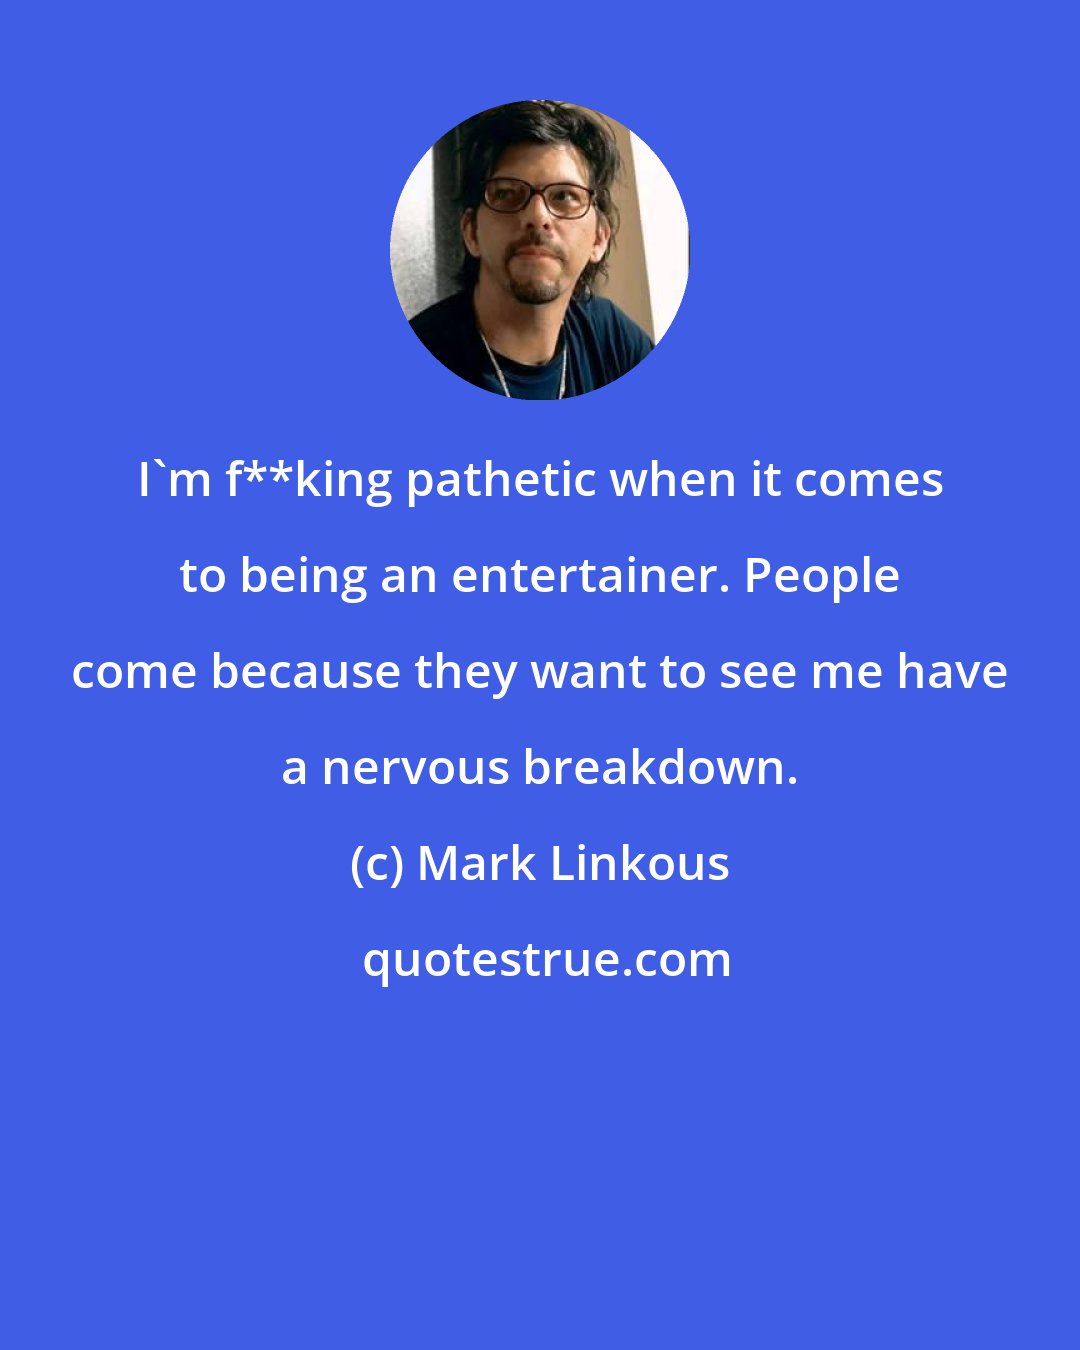 Mark Linkous: I'm f**king pathetic when it comes to being an entertainer. People come because they want to see me have a nervous breakdown.